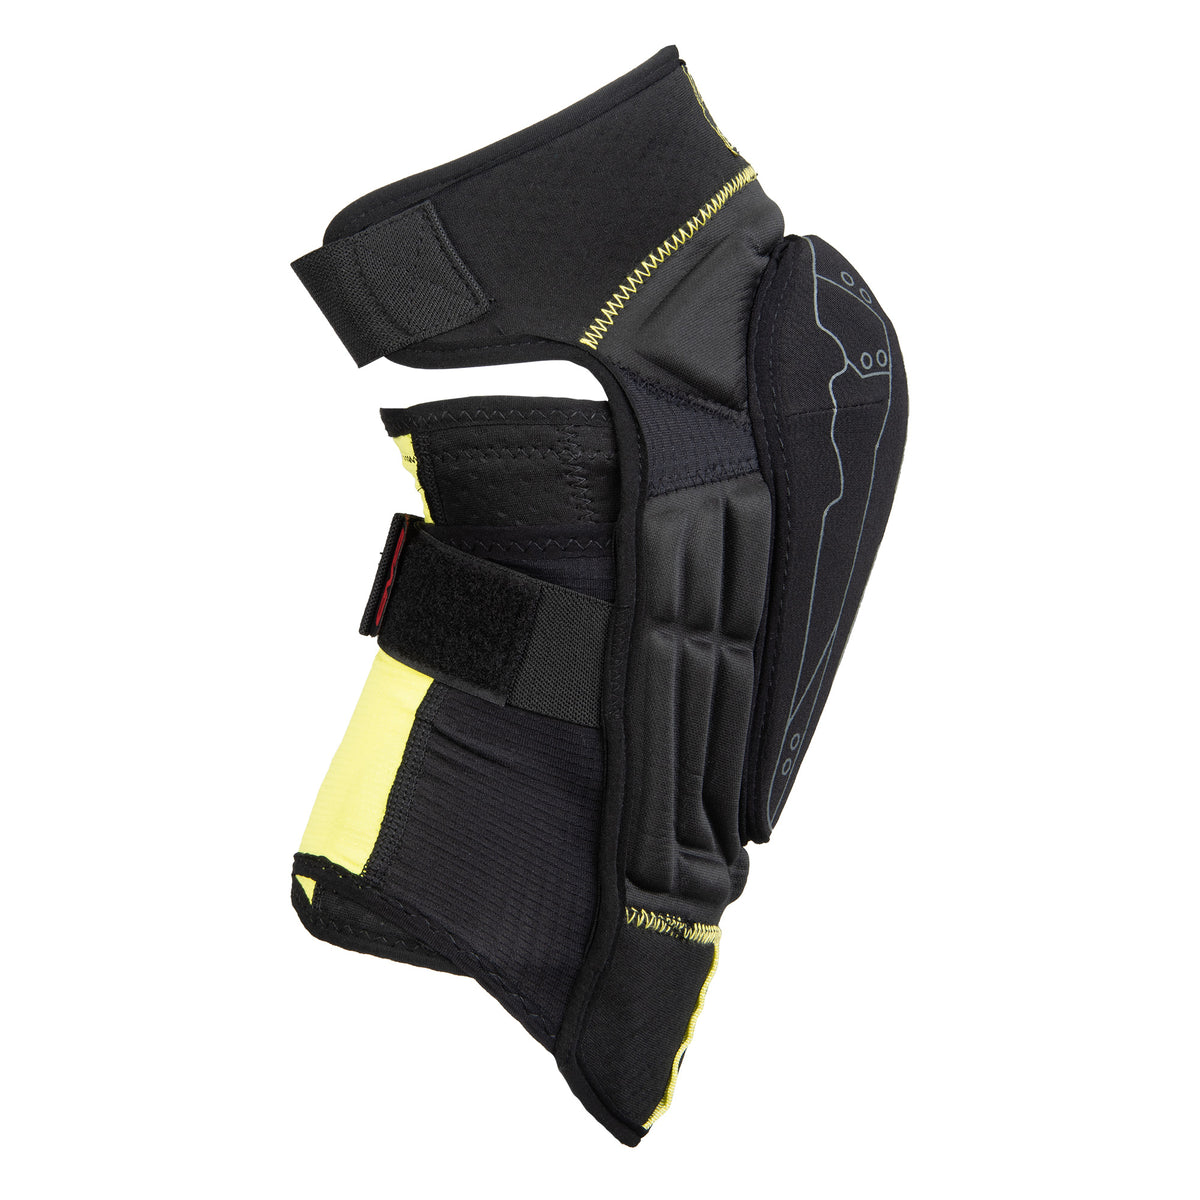 TP 199 Youth Knee Pad - EVS Sports